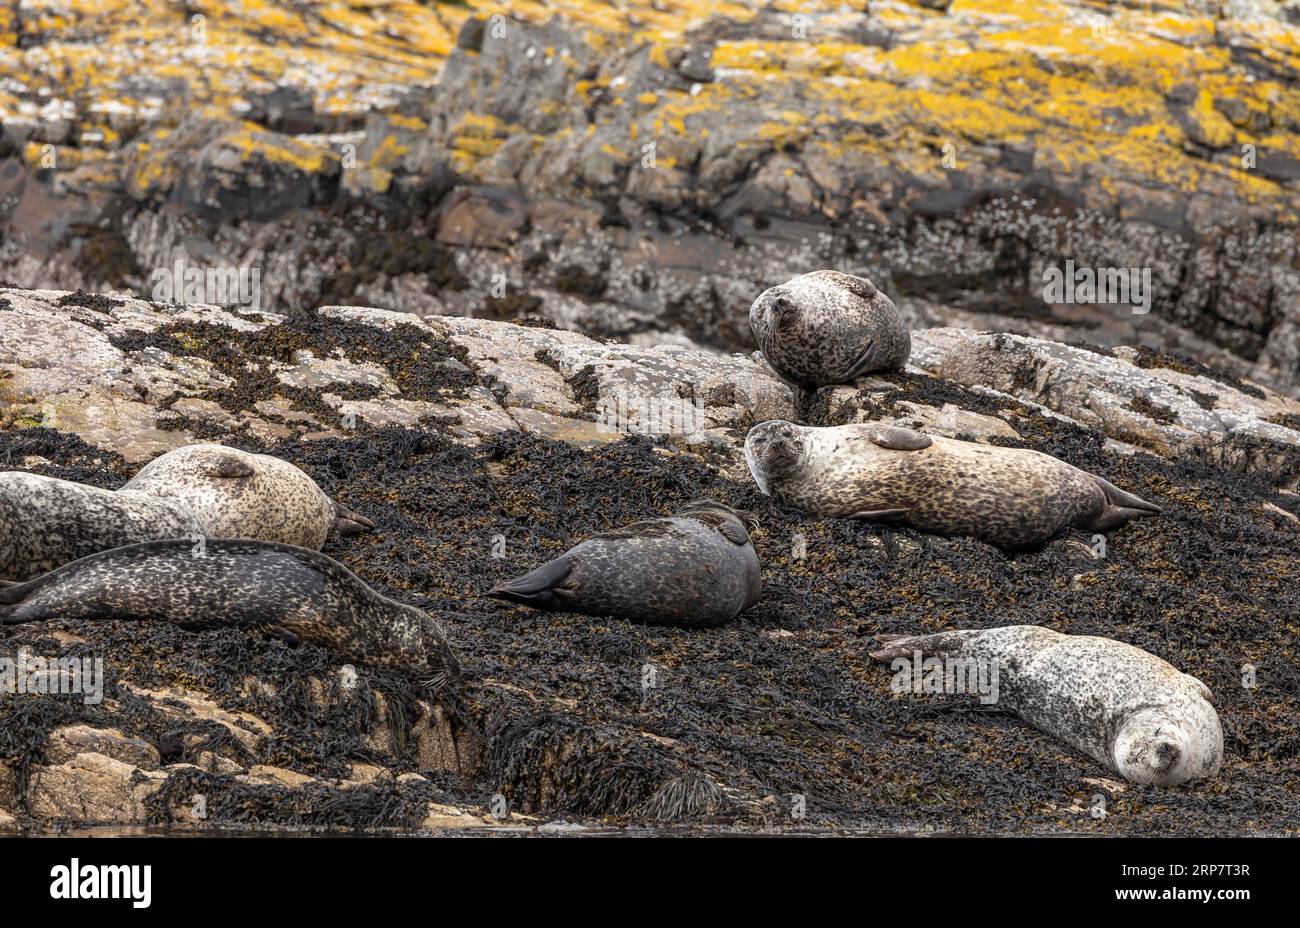 Six harbour seals basking lying on the seaweed on rocks that are covered in yellow/organge lichen Stock Photo